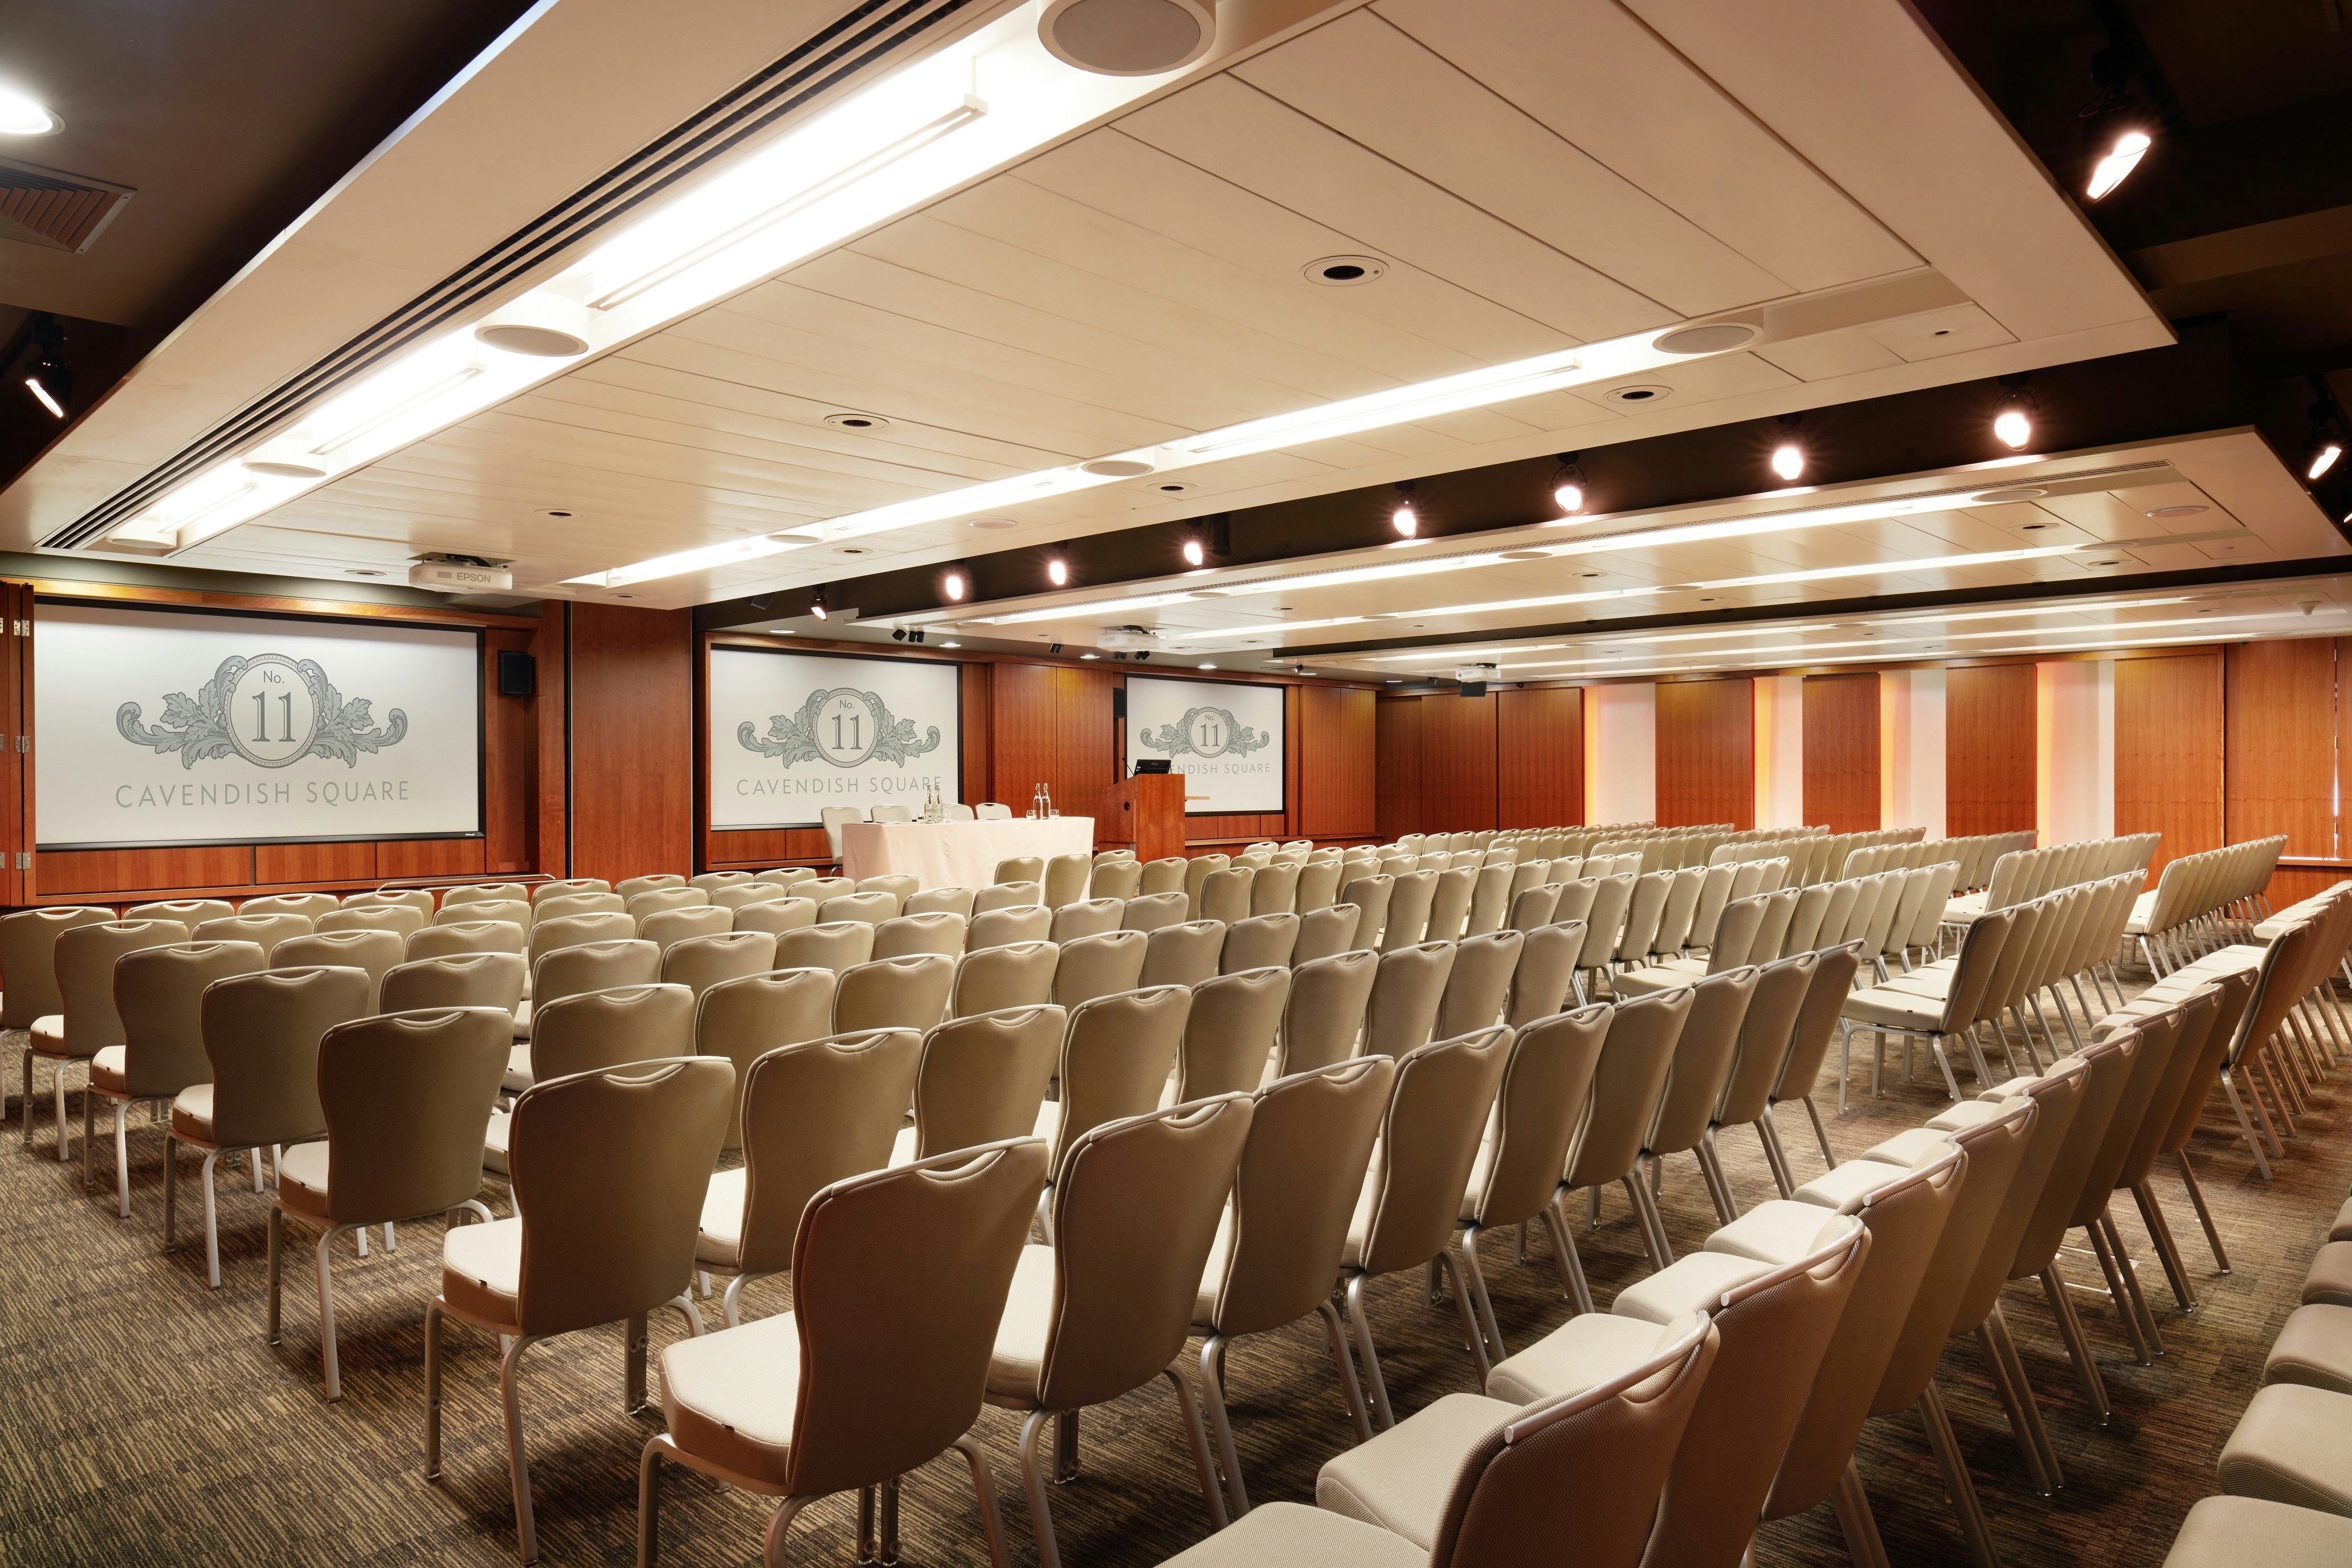 Conference Venues in South London - No.11 Cavendish Square